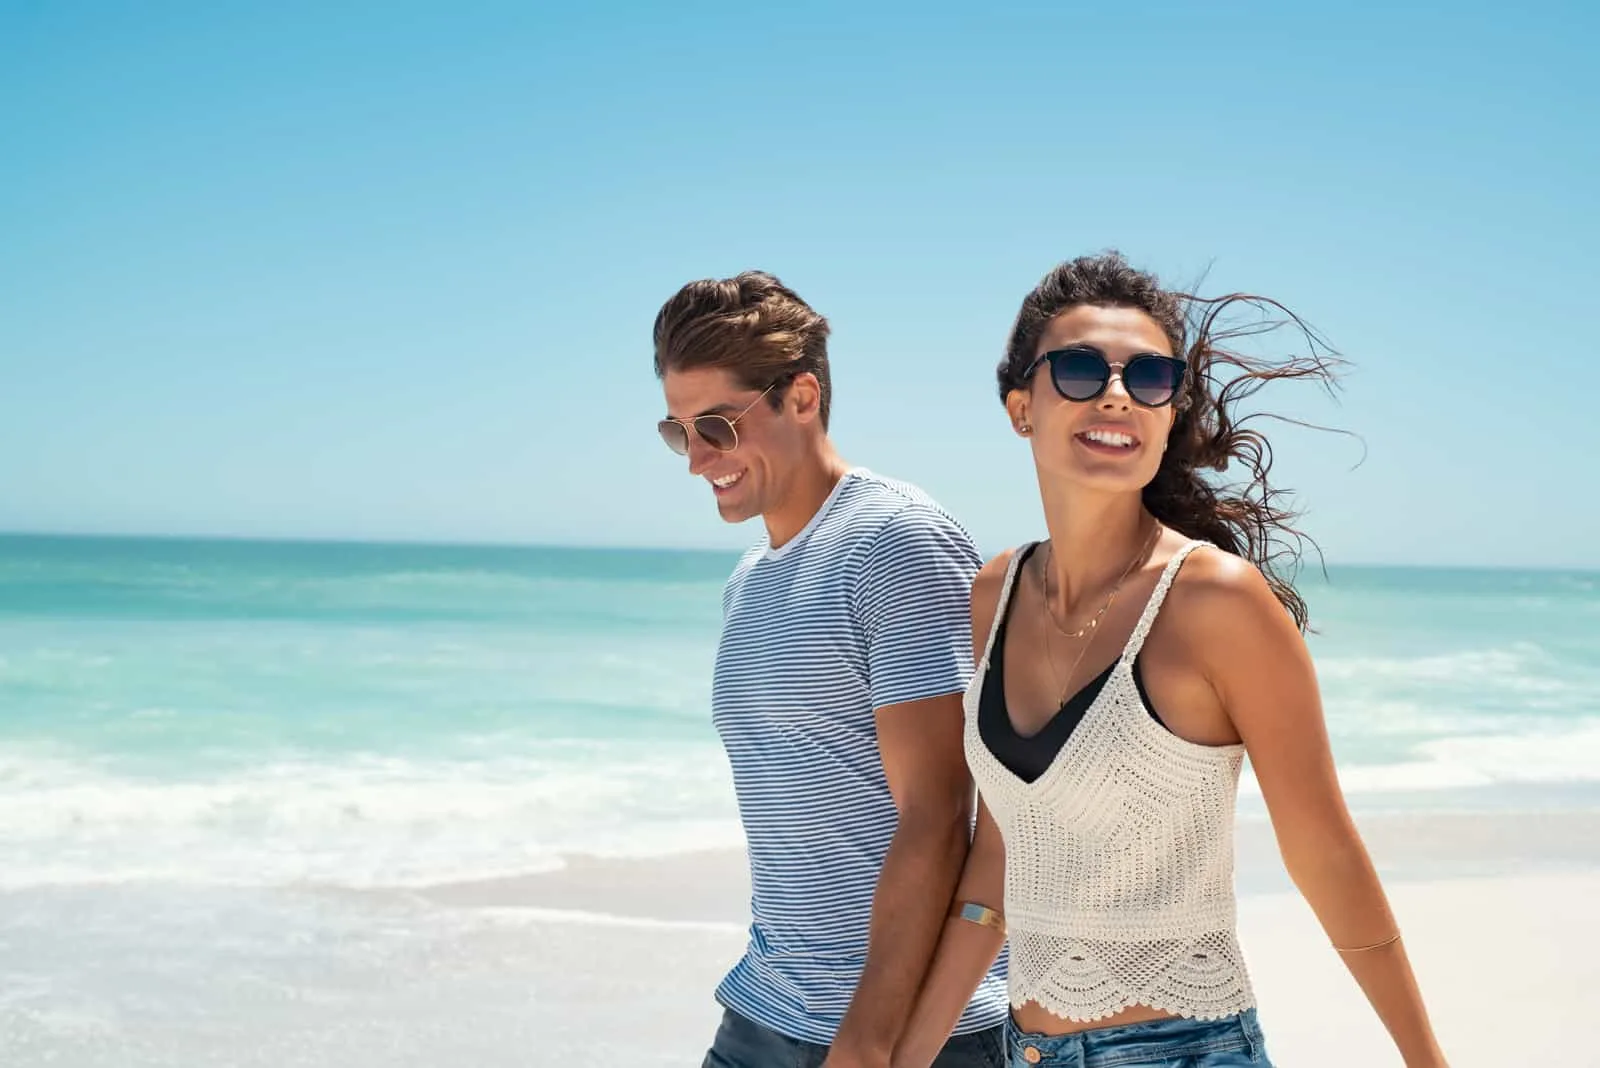 a smiling man and woman walk the beach